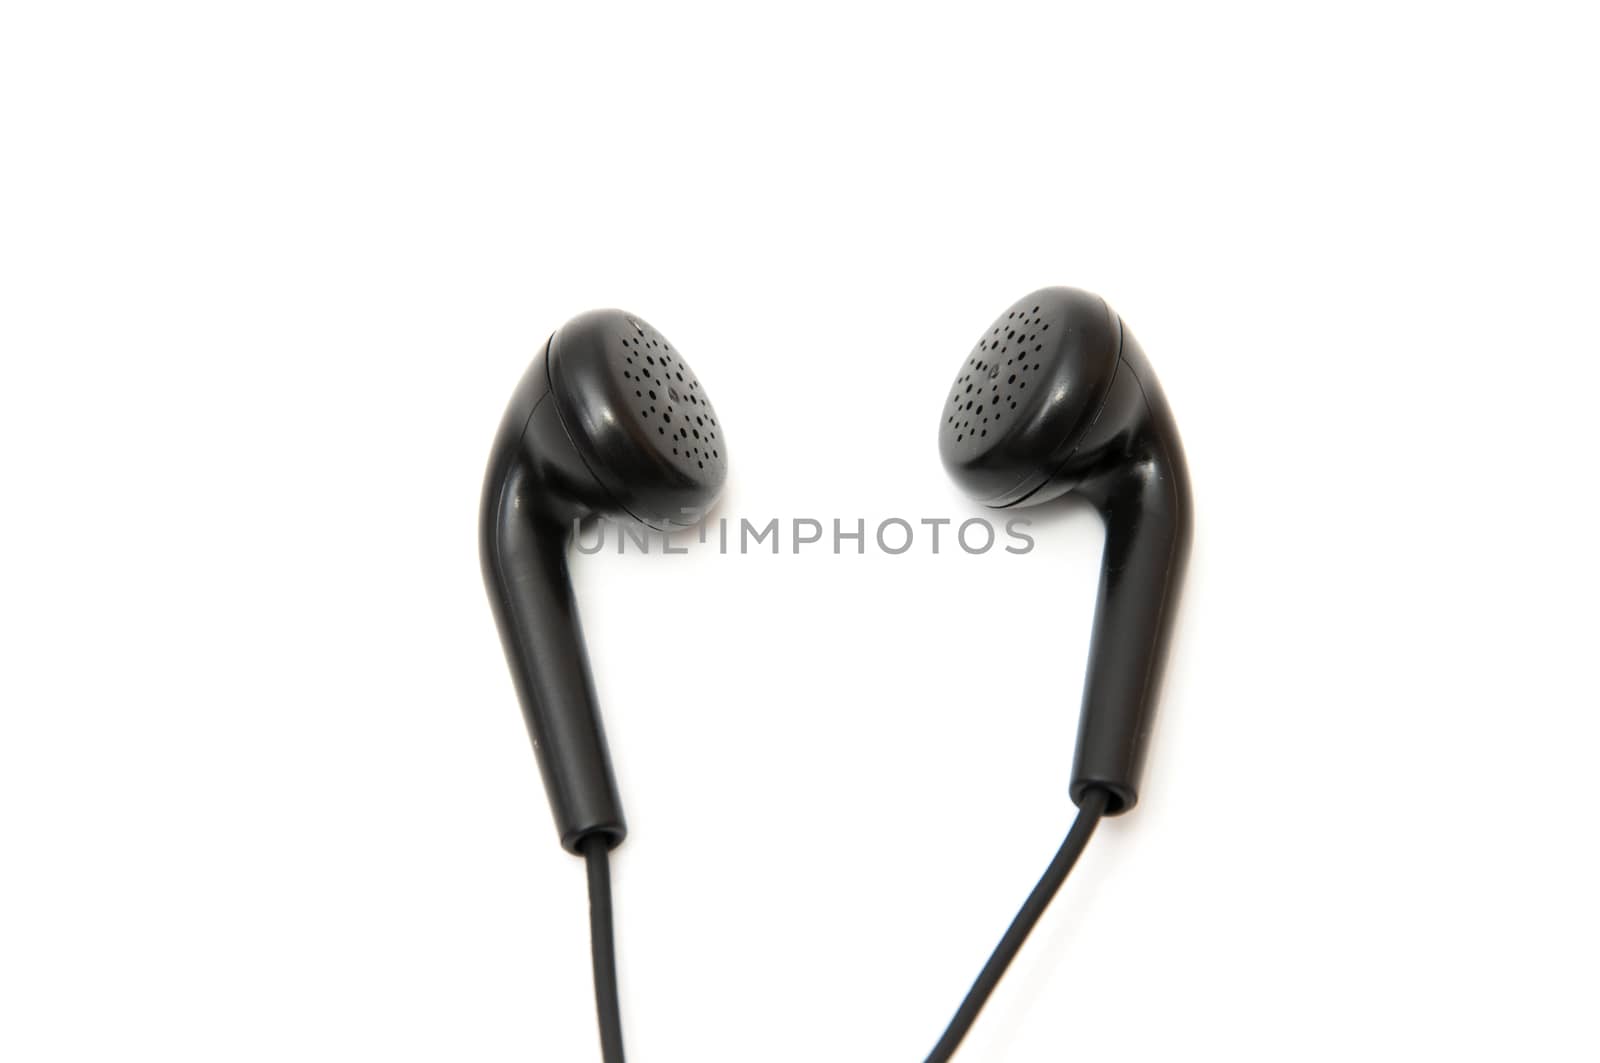 music headphones on a white background